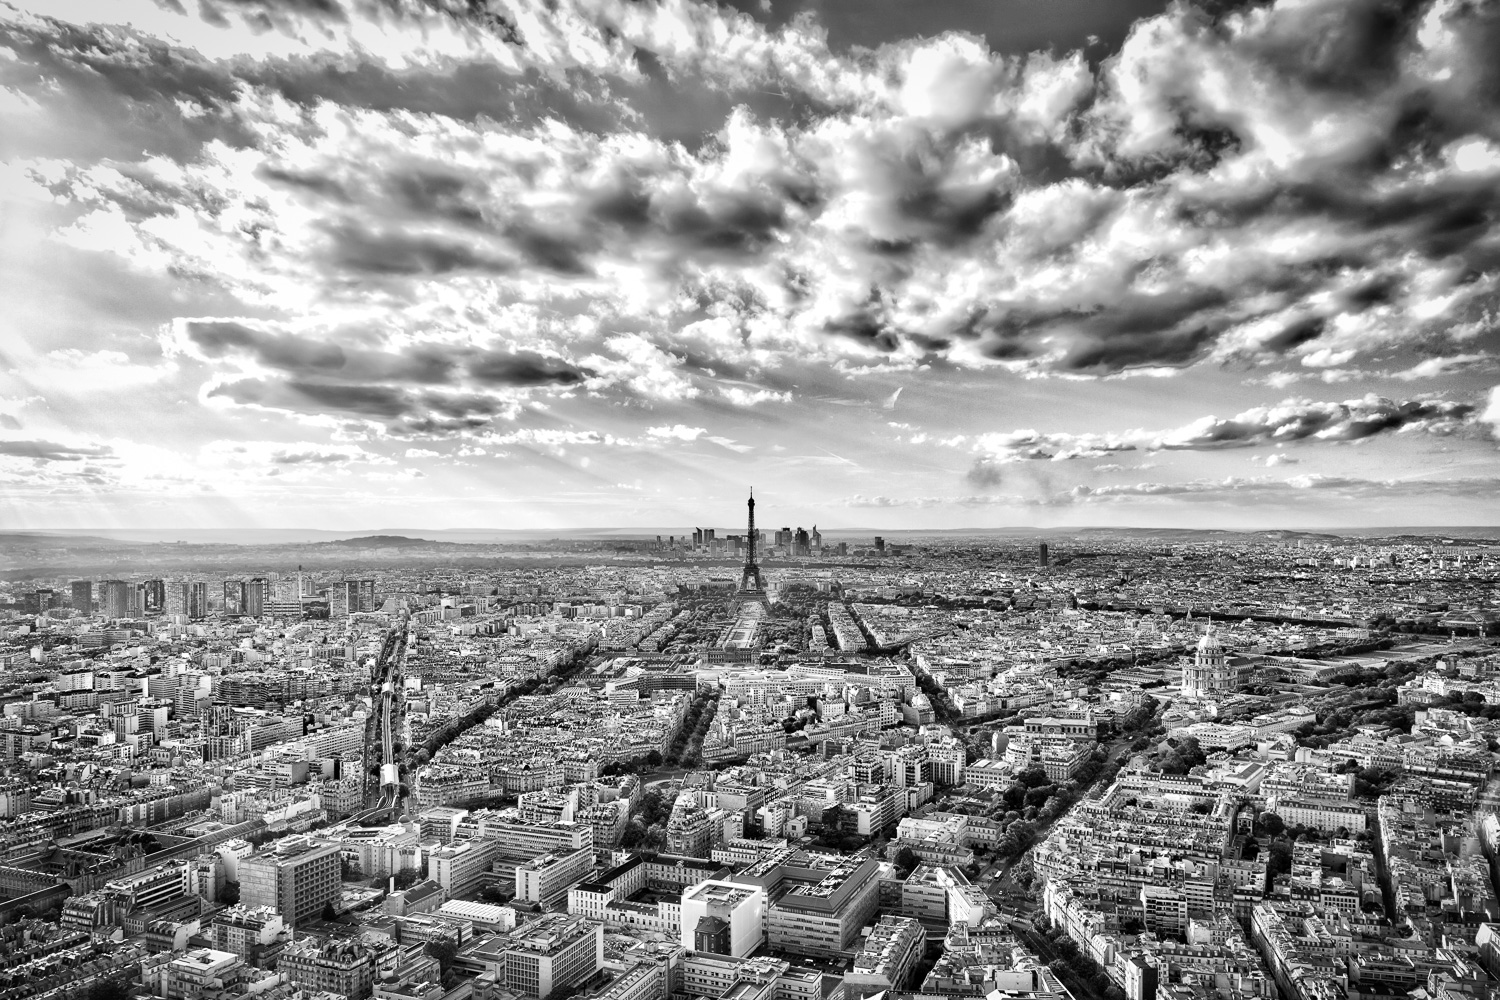 View from the Montparnasse Tower toward the Eiffel Tower in Paris